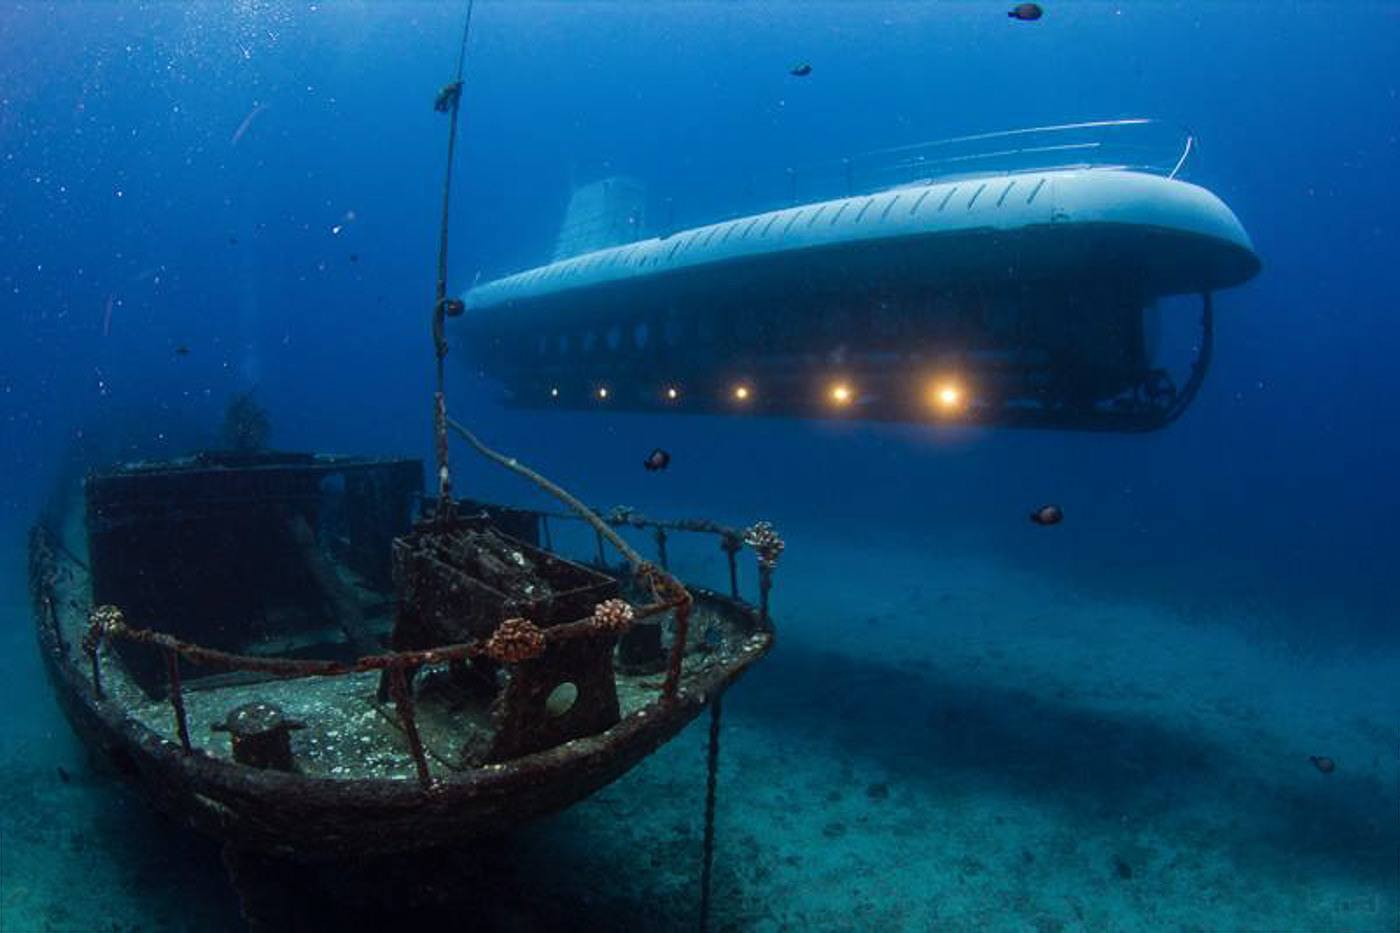 a submarine floating in the ocean next to a boat.